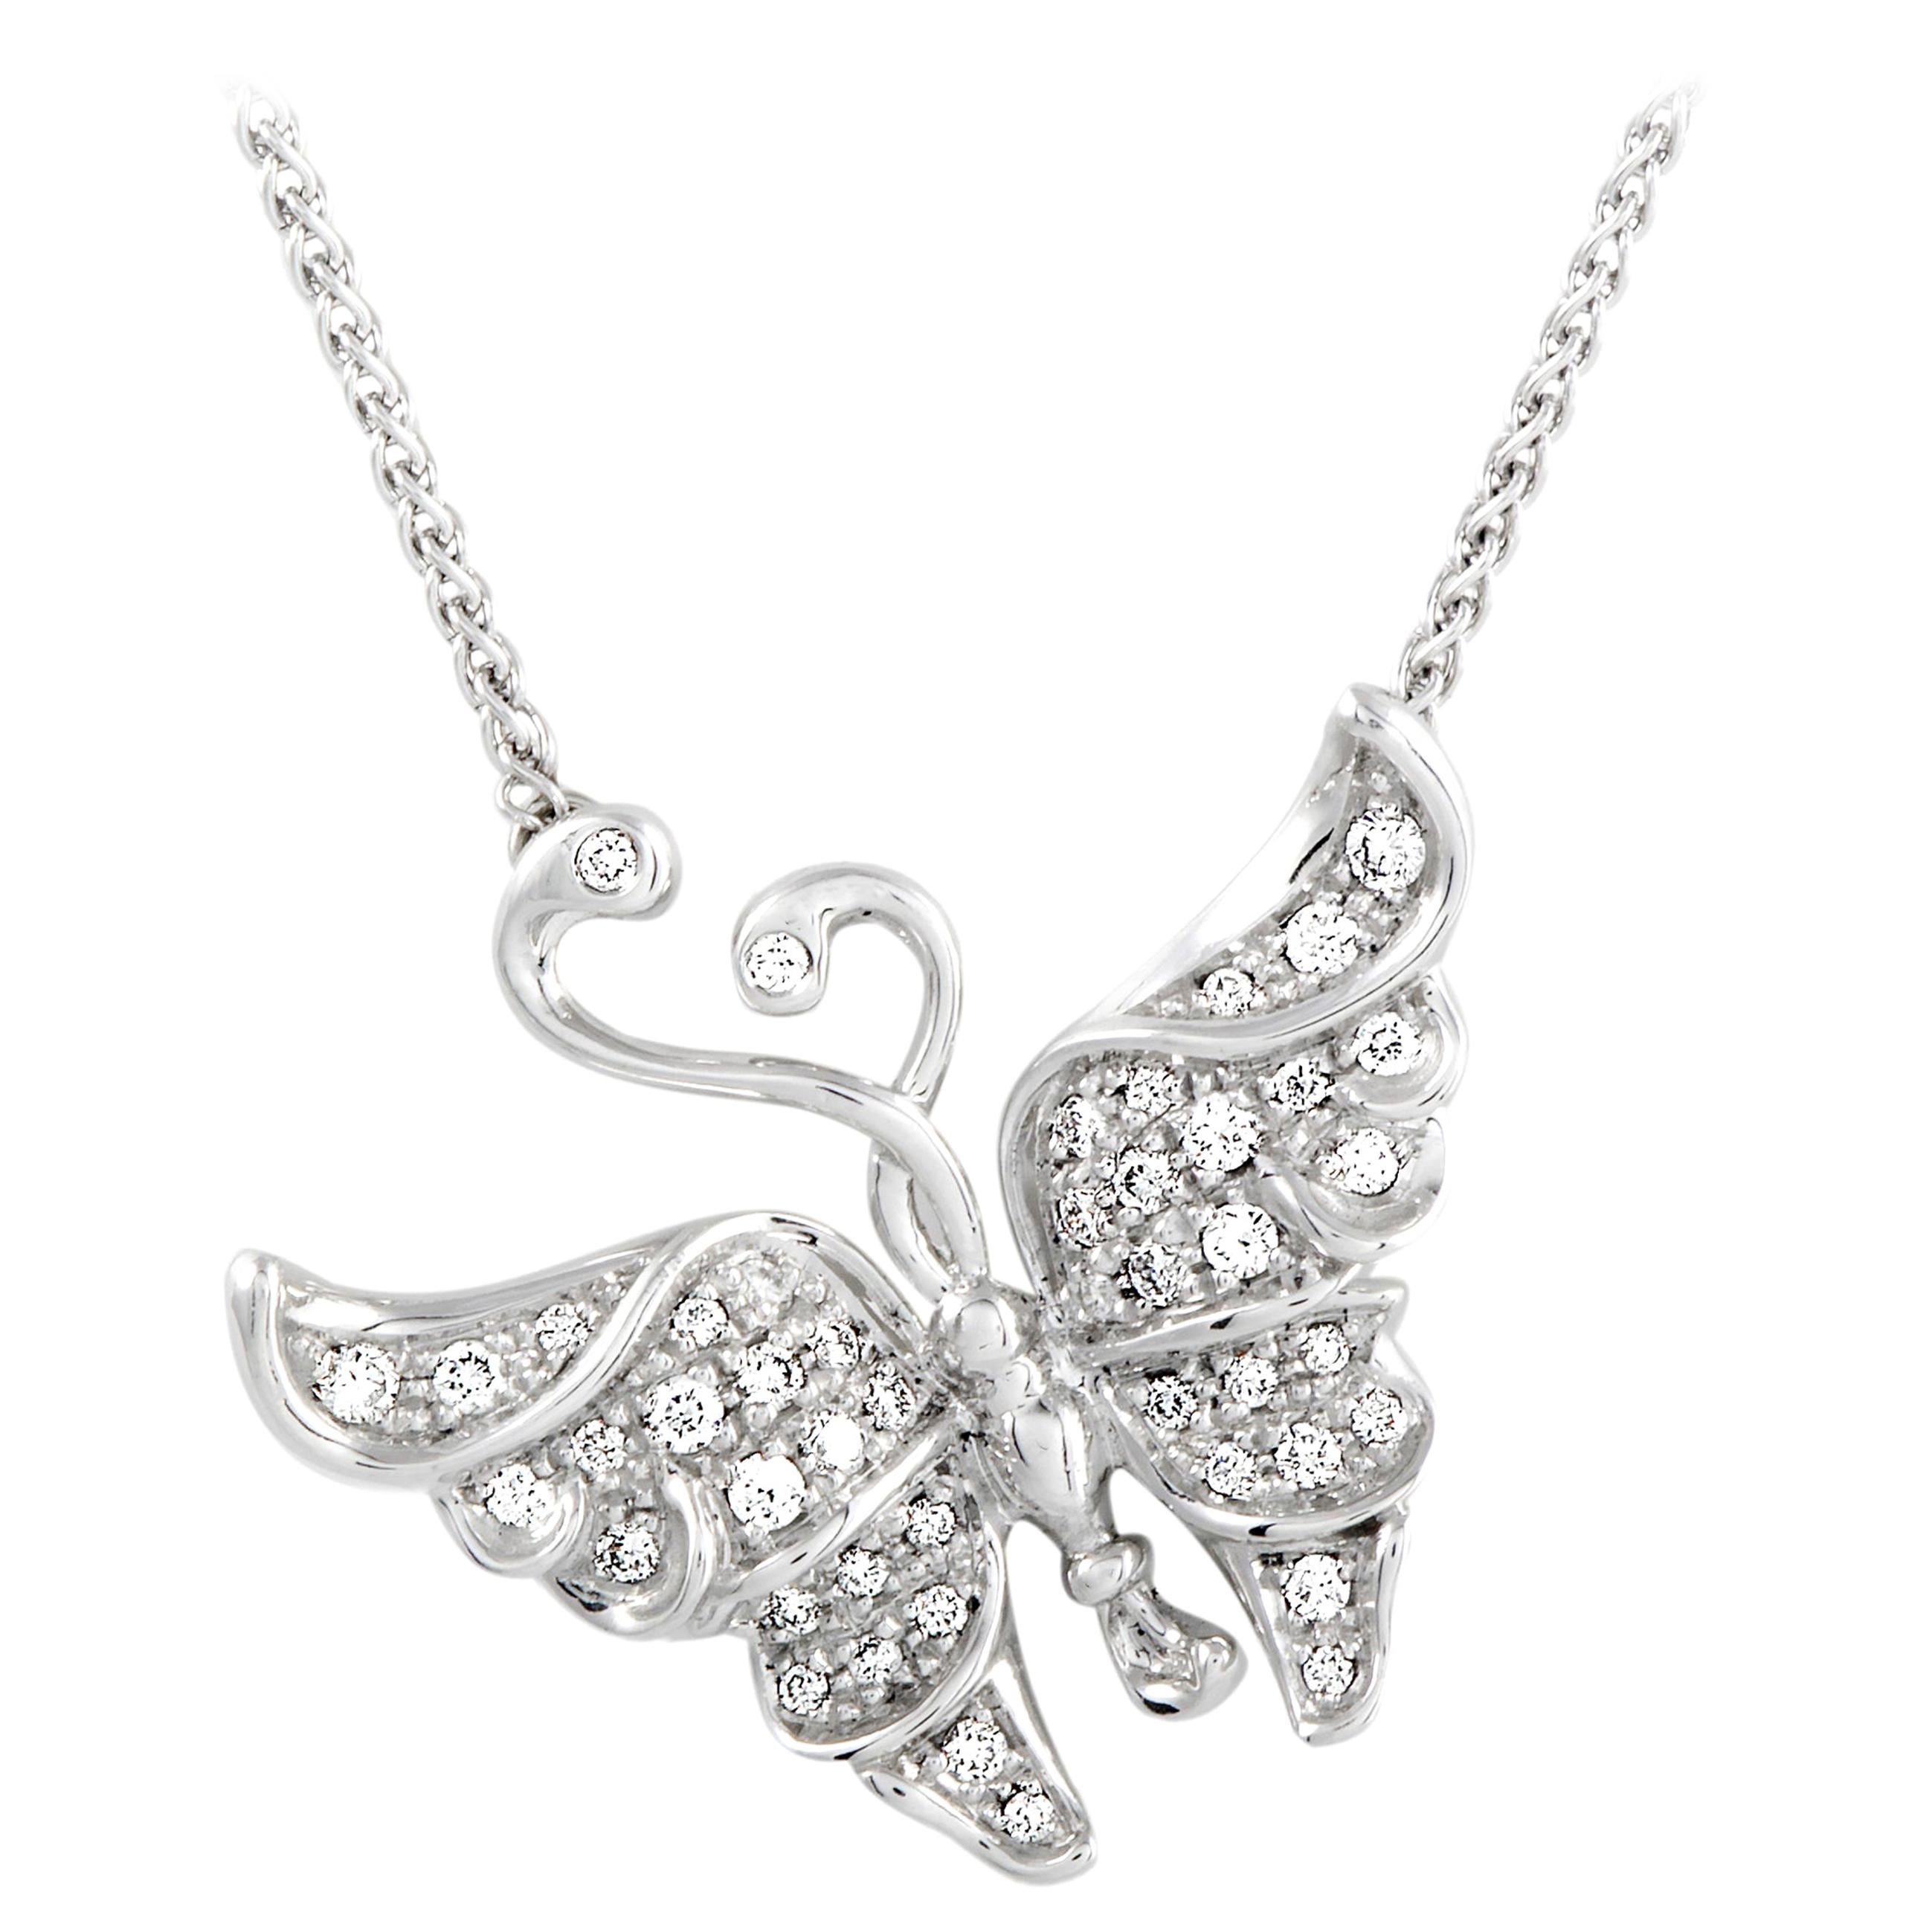 Carrera y Carrera 18K White Gold and 0.37 Ct Diamond Butterfly Pendant Necklace